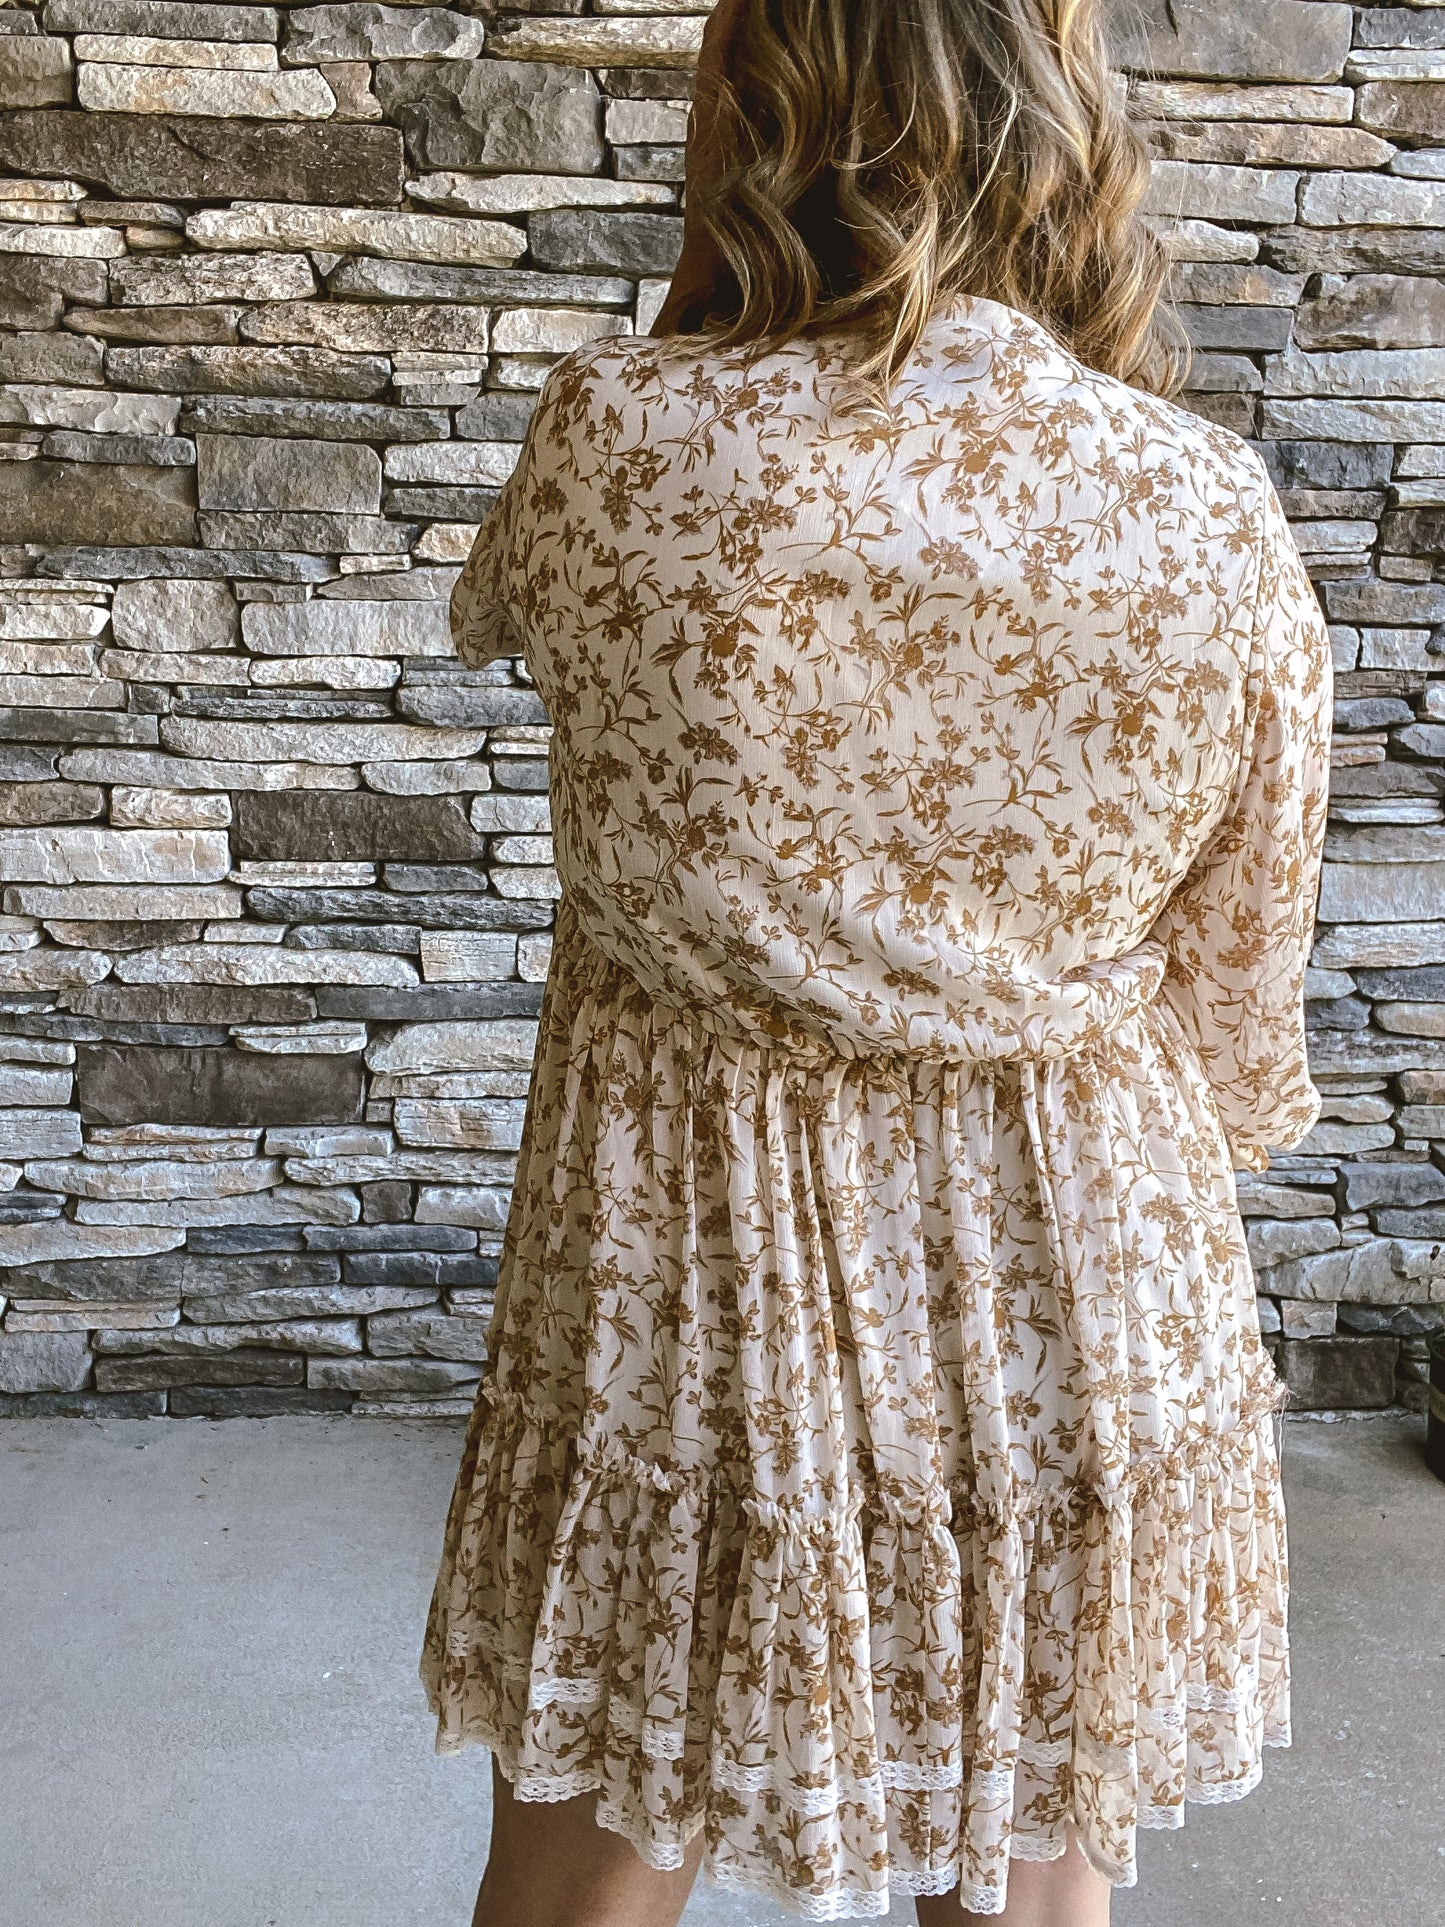 Lost in Thought Dress - Willow Avenue Boutique